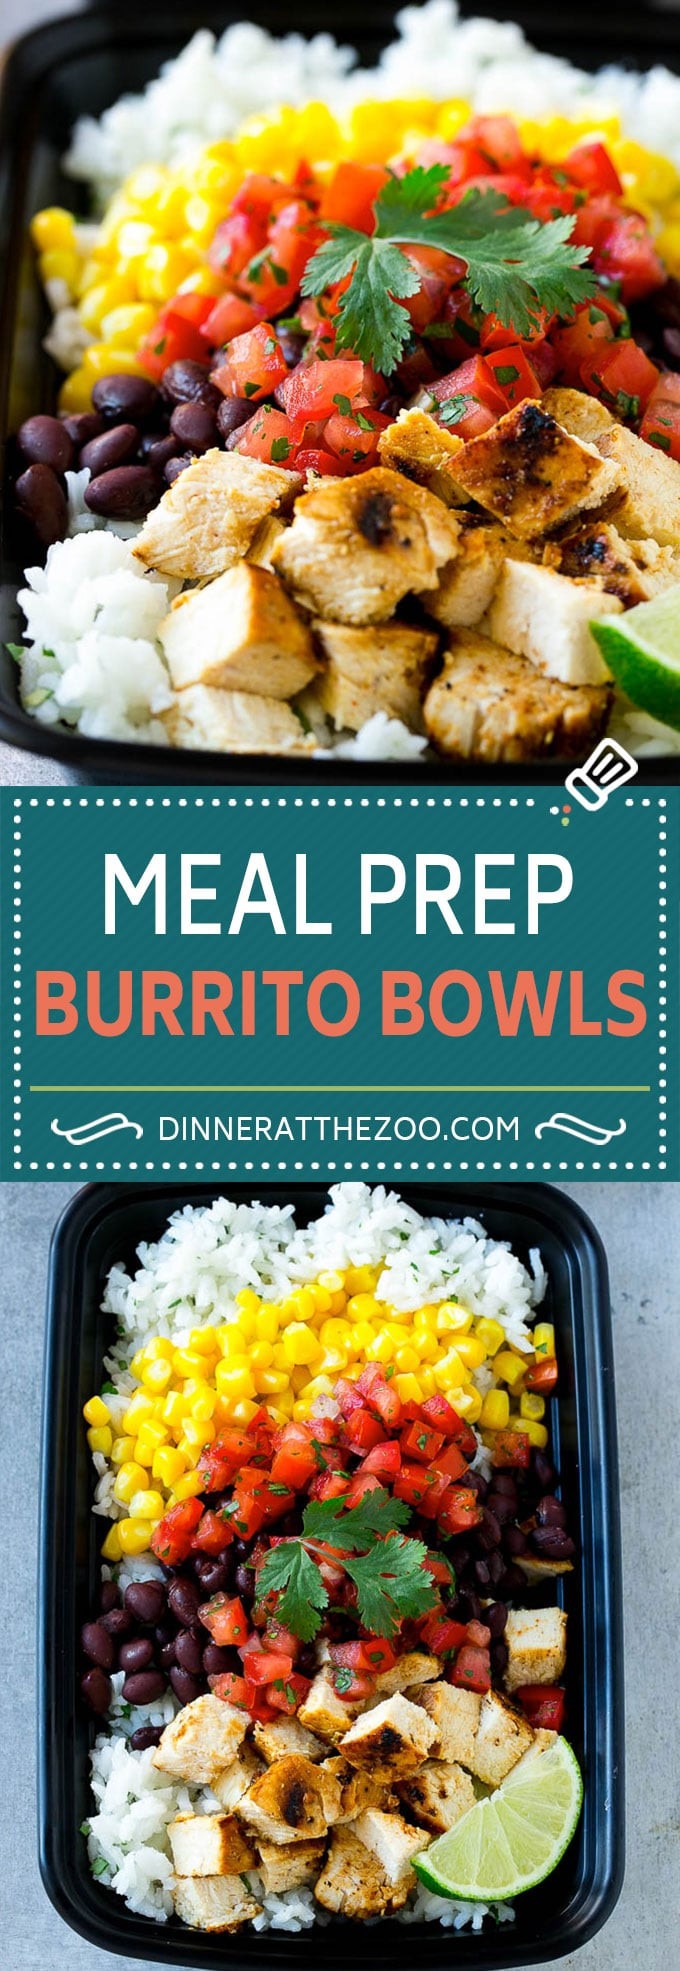 Meal Prep Dinner Ideas
 36 Easy Meal Prep Recipes Dinner at the Zoo